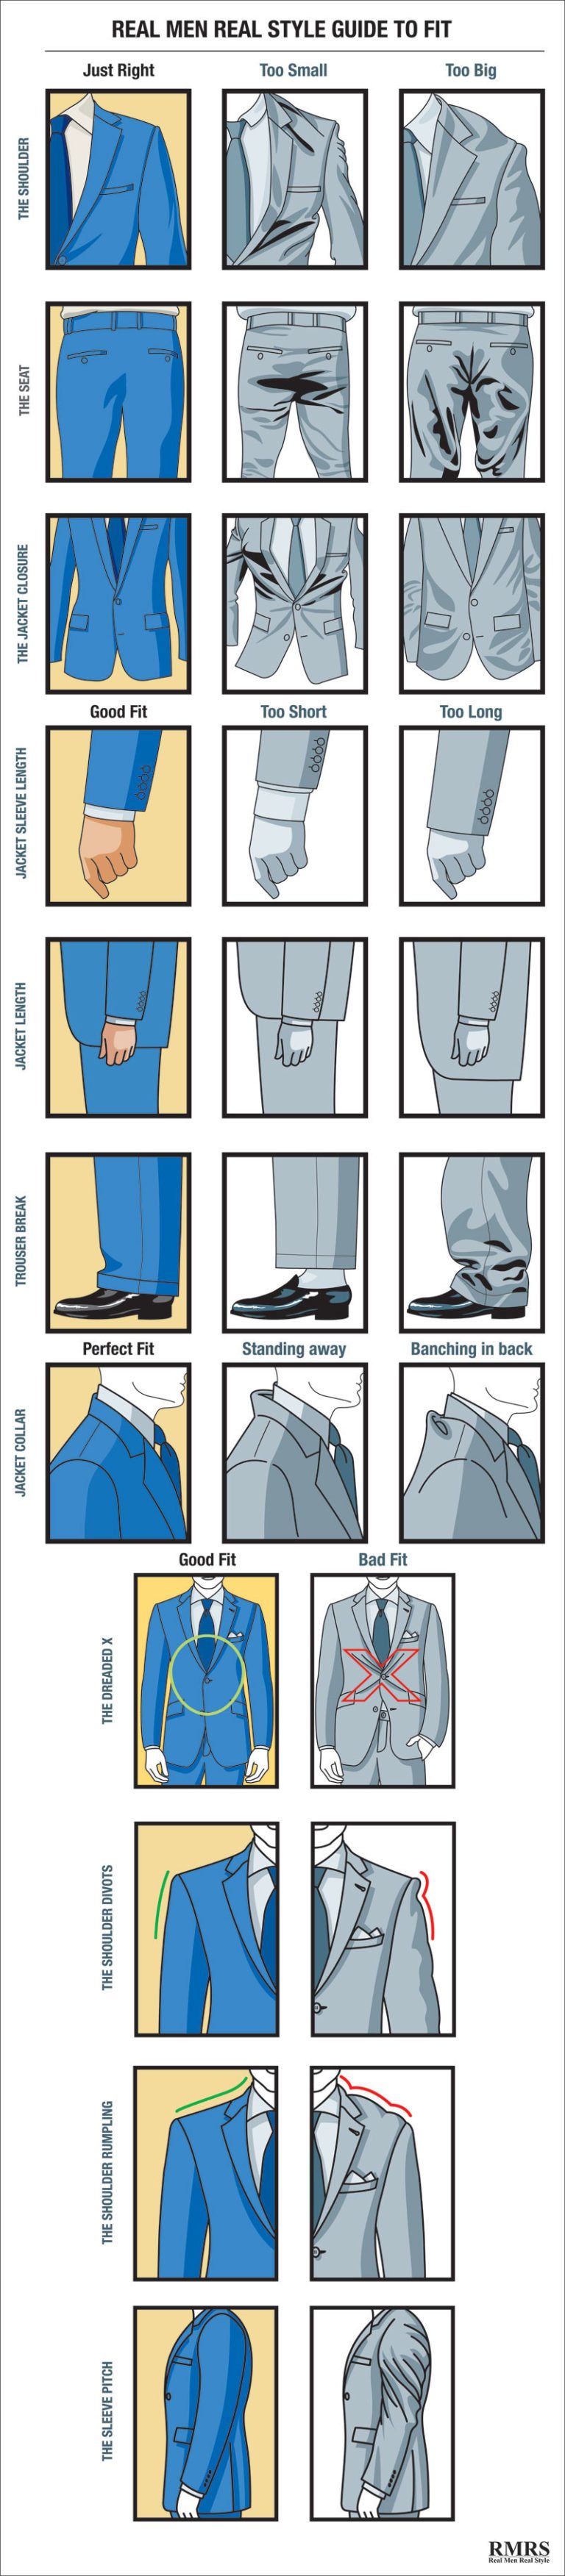 Guide to Fit Men's Suite